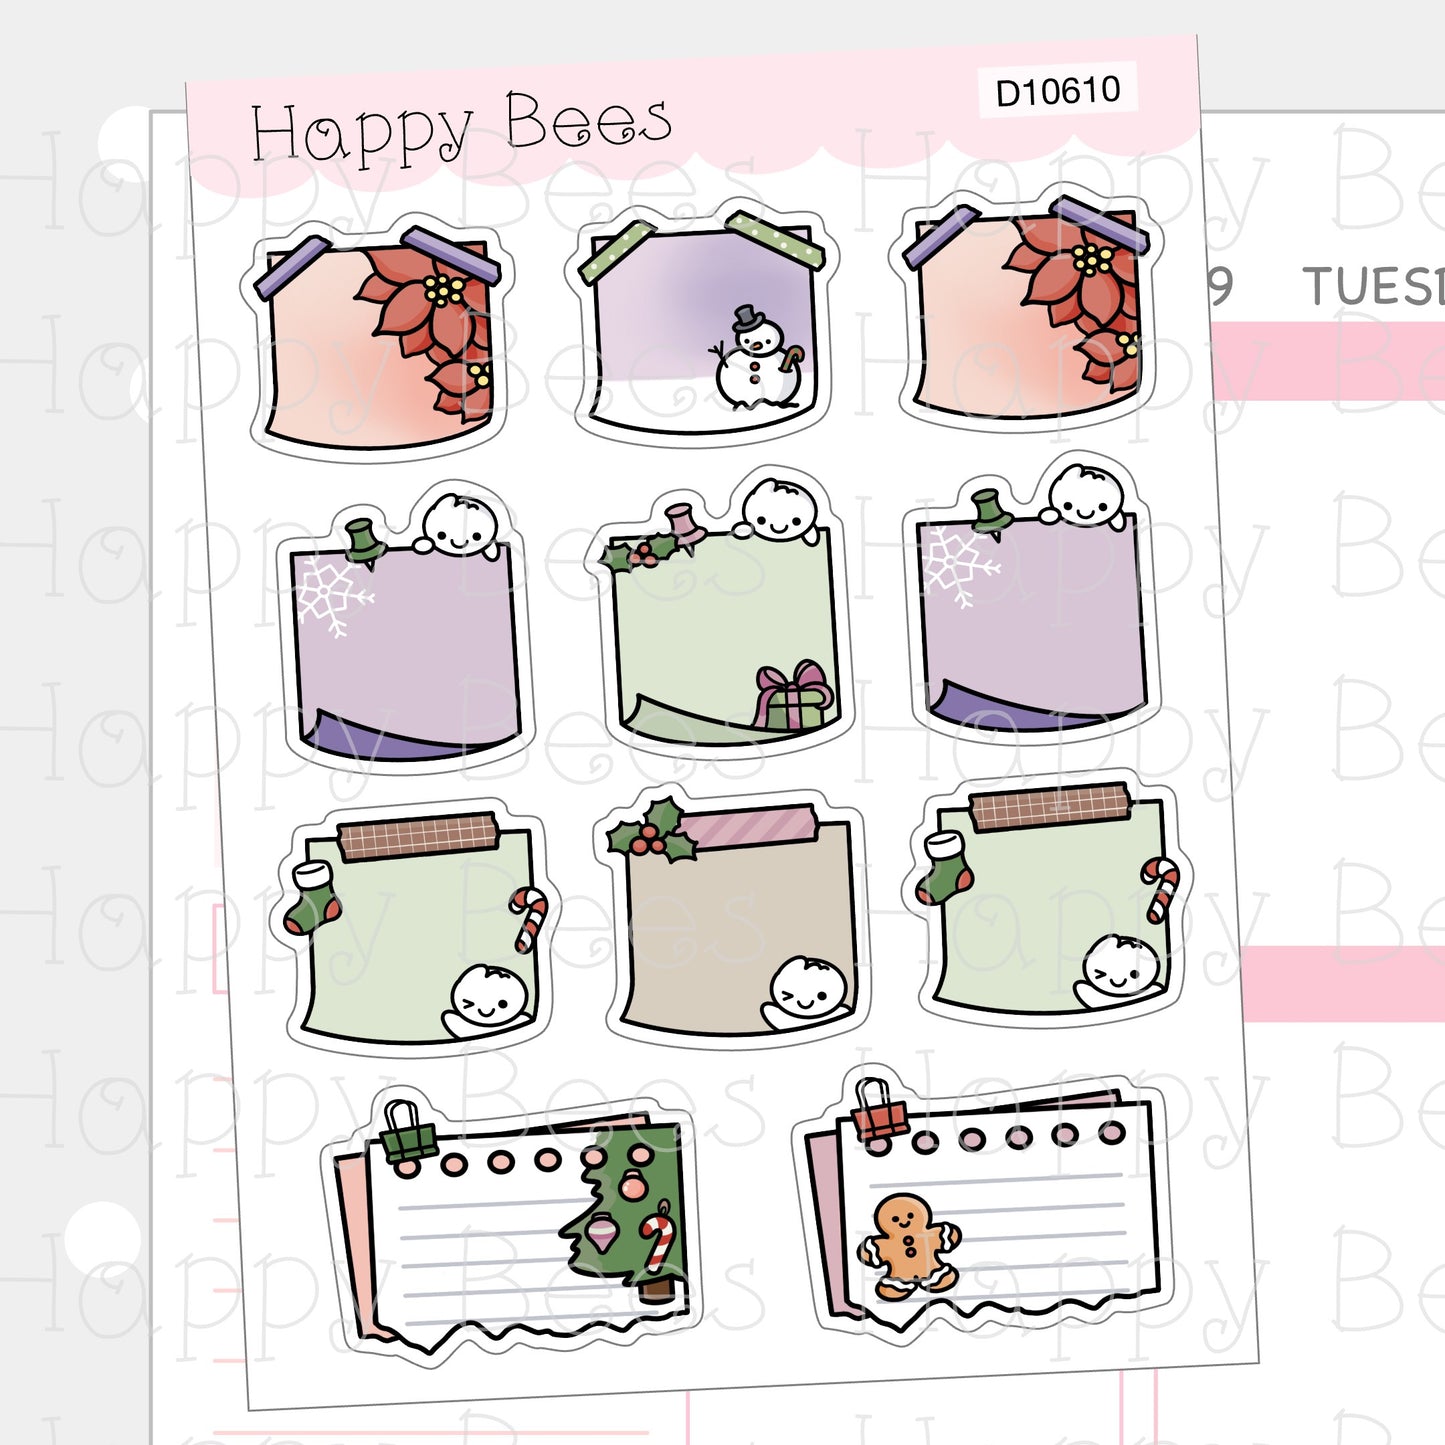 Christmas Sticky Notes & Memos Vol. 2 - Cute Doodles Winter Holiday Planner Stickers D10610